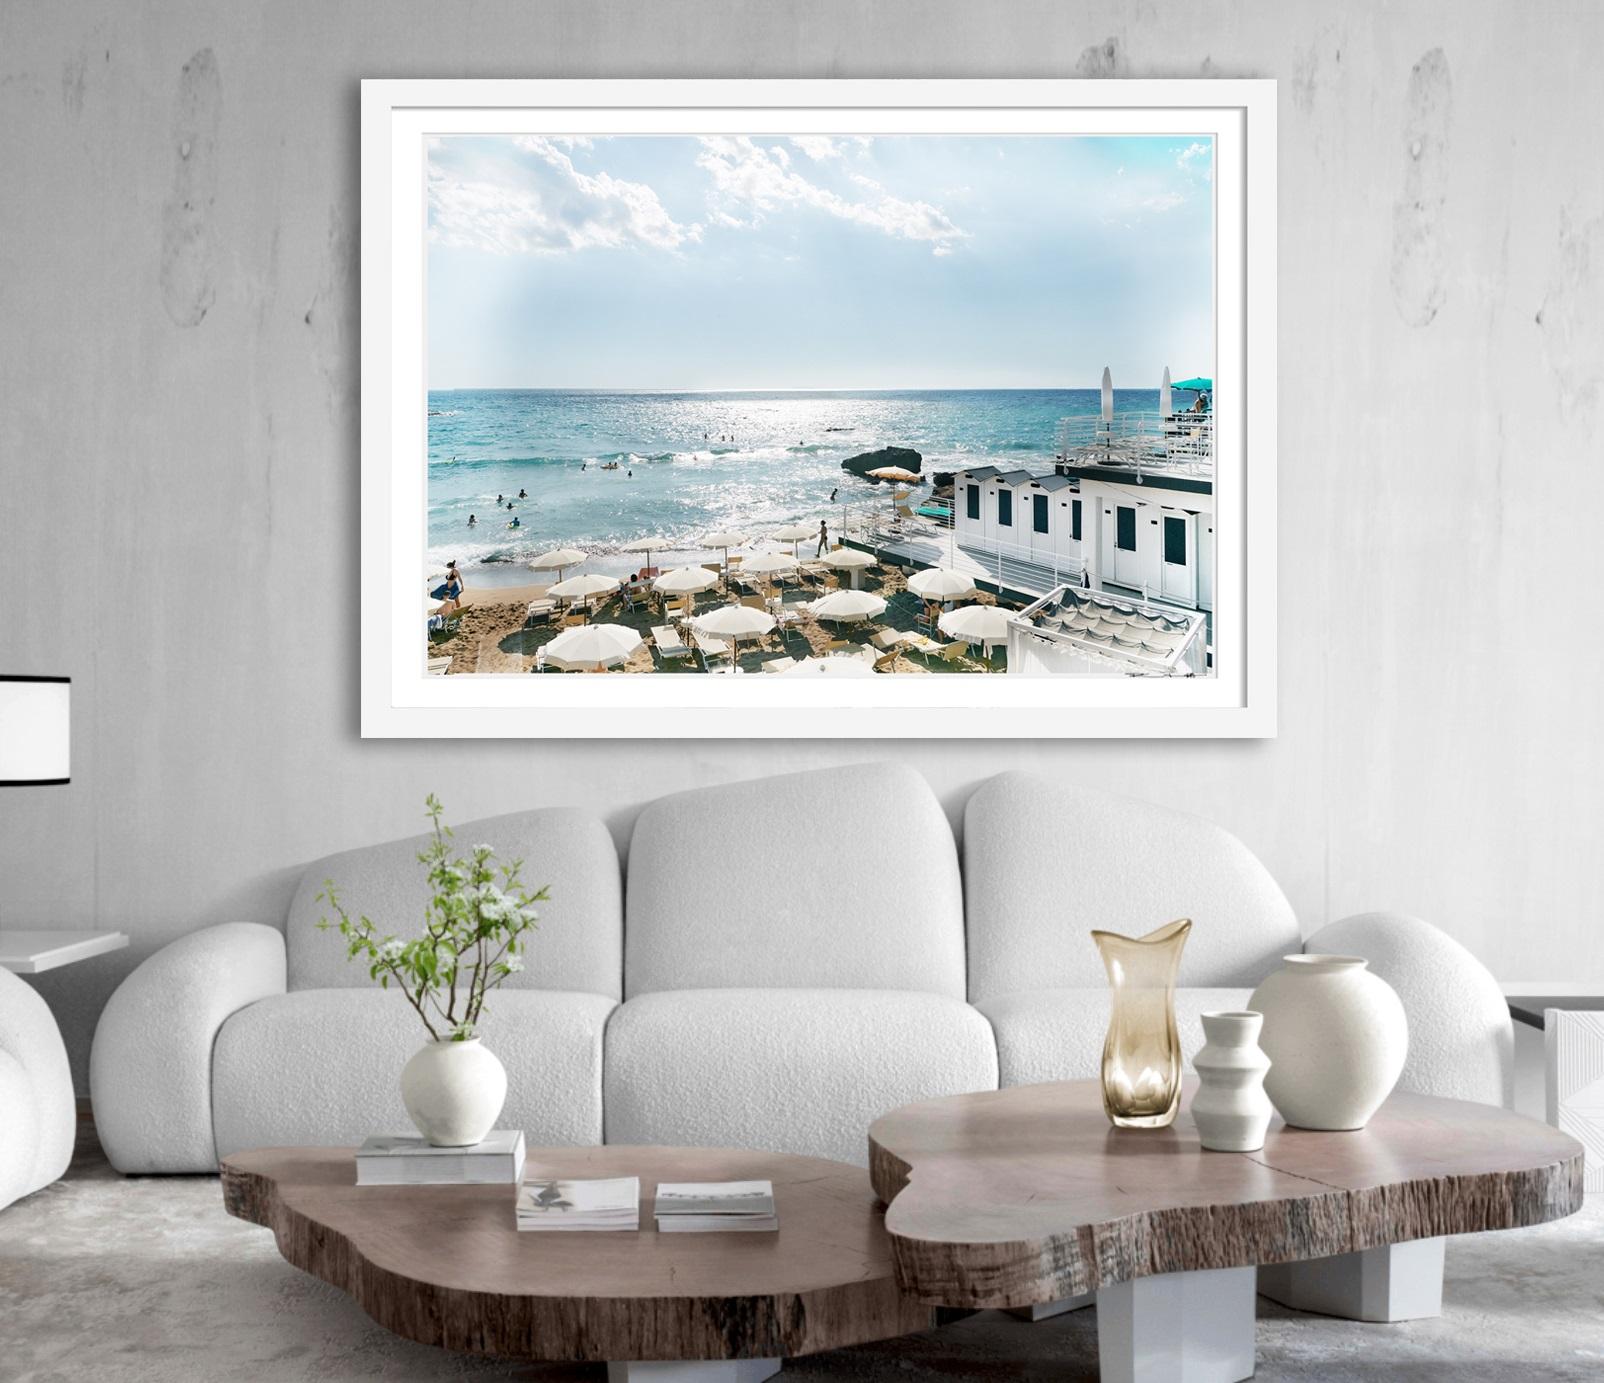 Quercetano Italy Tre - Beach and Sea View with Umbrellas, People, and Mountains For Sale 1